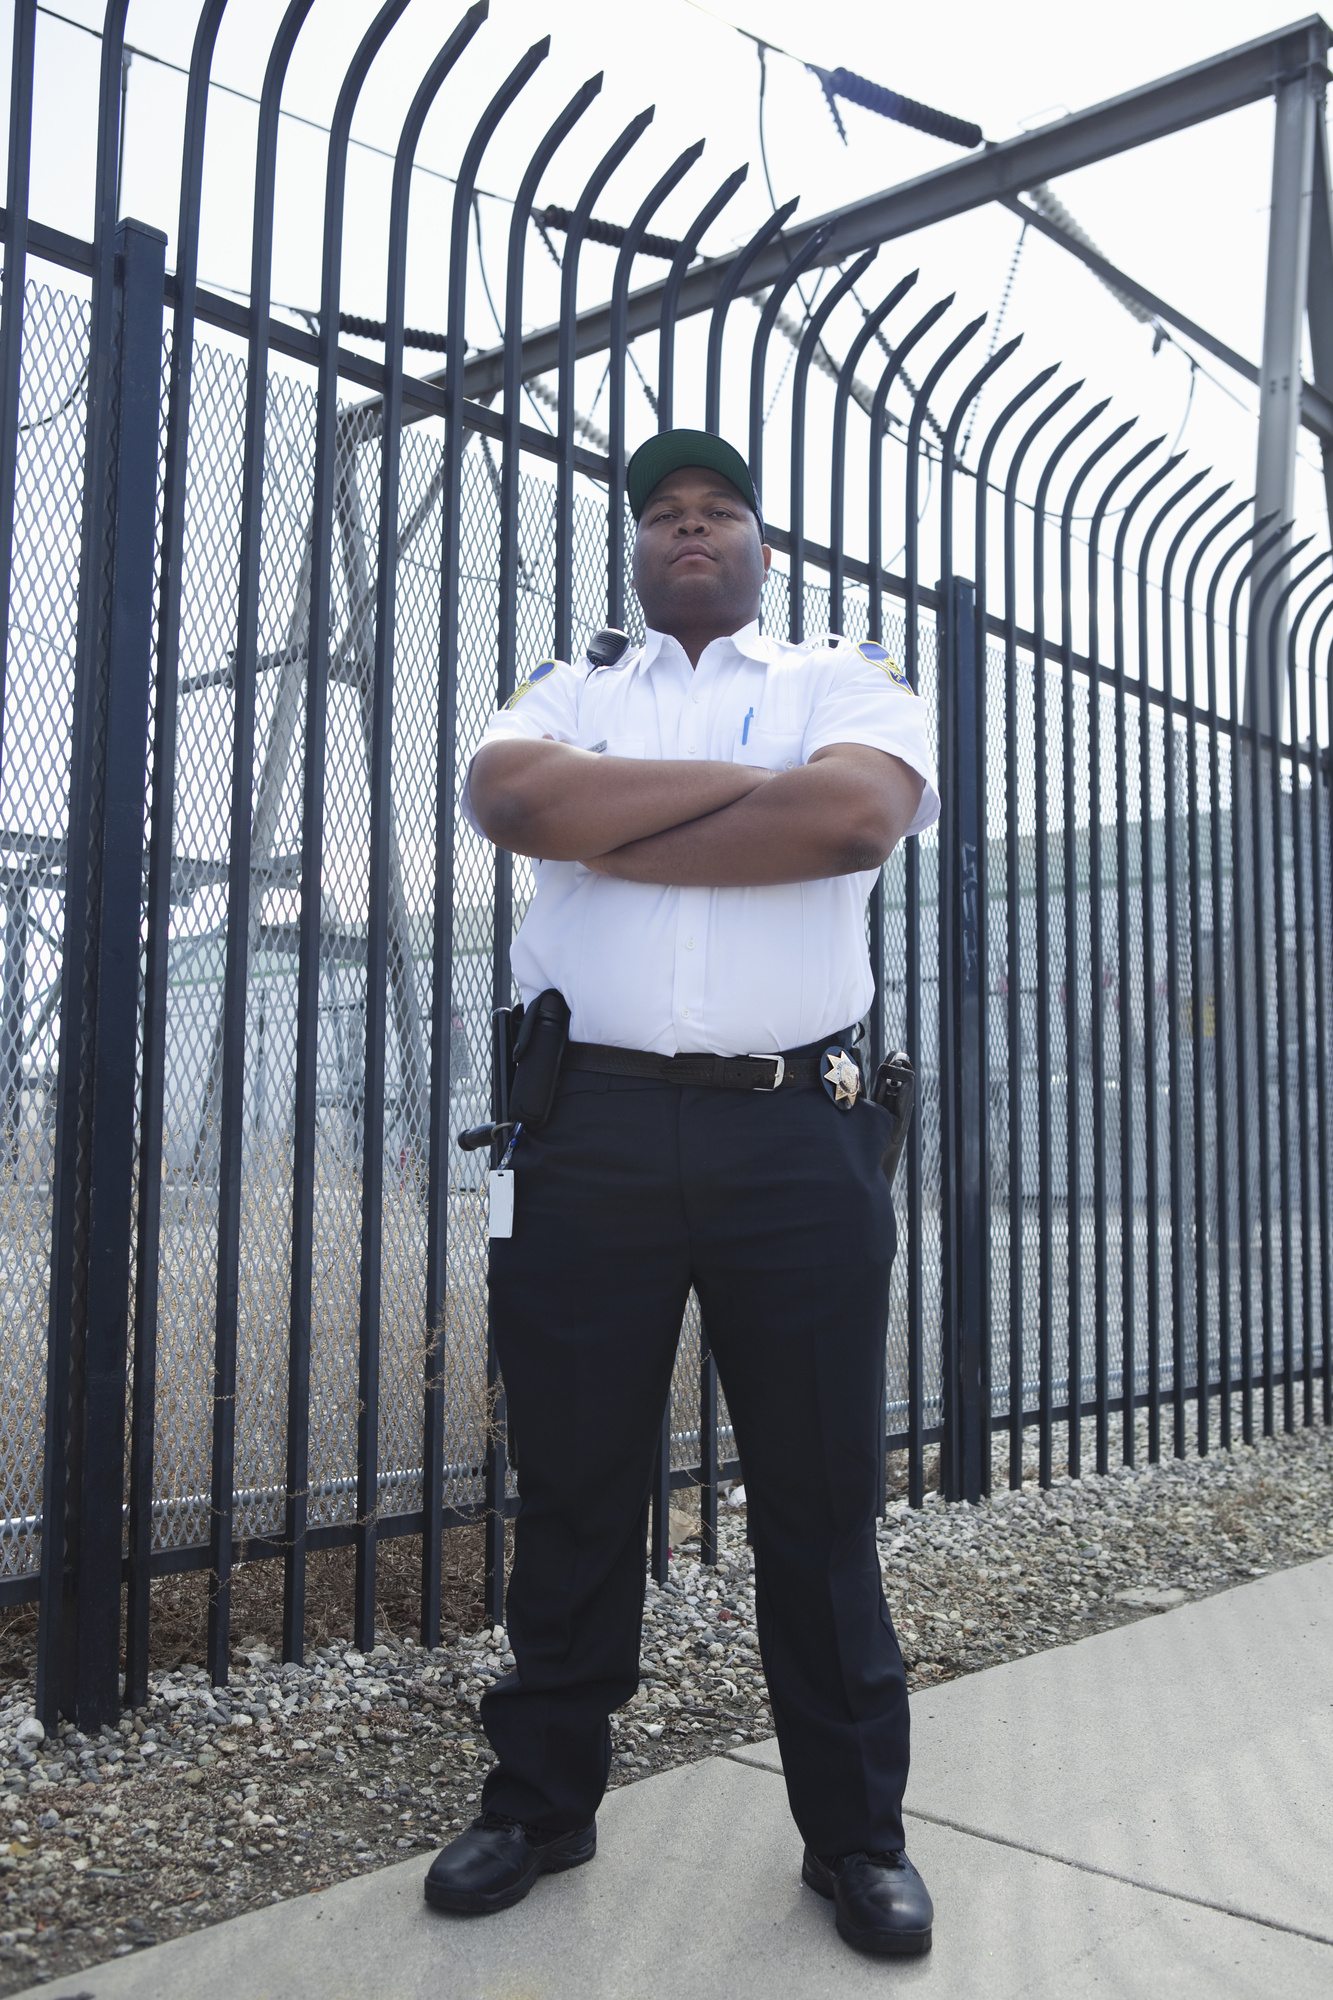 How Much Do Security Guards Make in the United States?